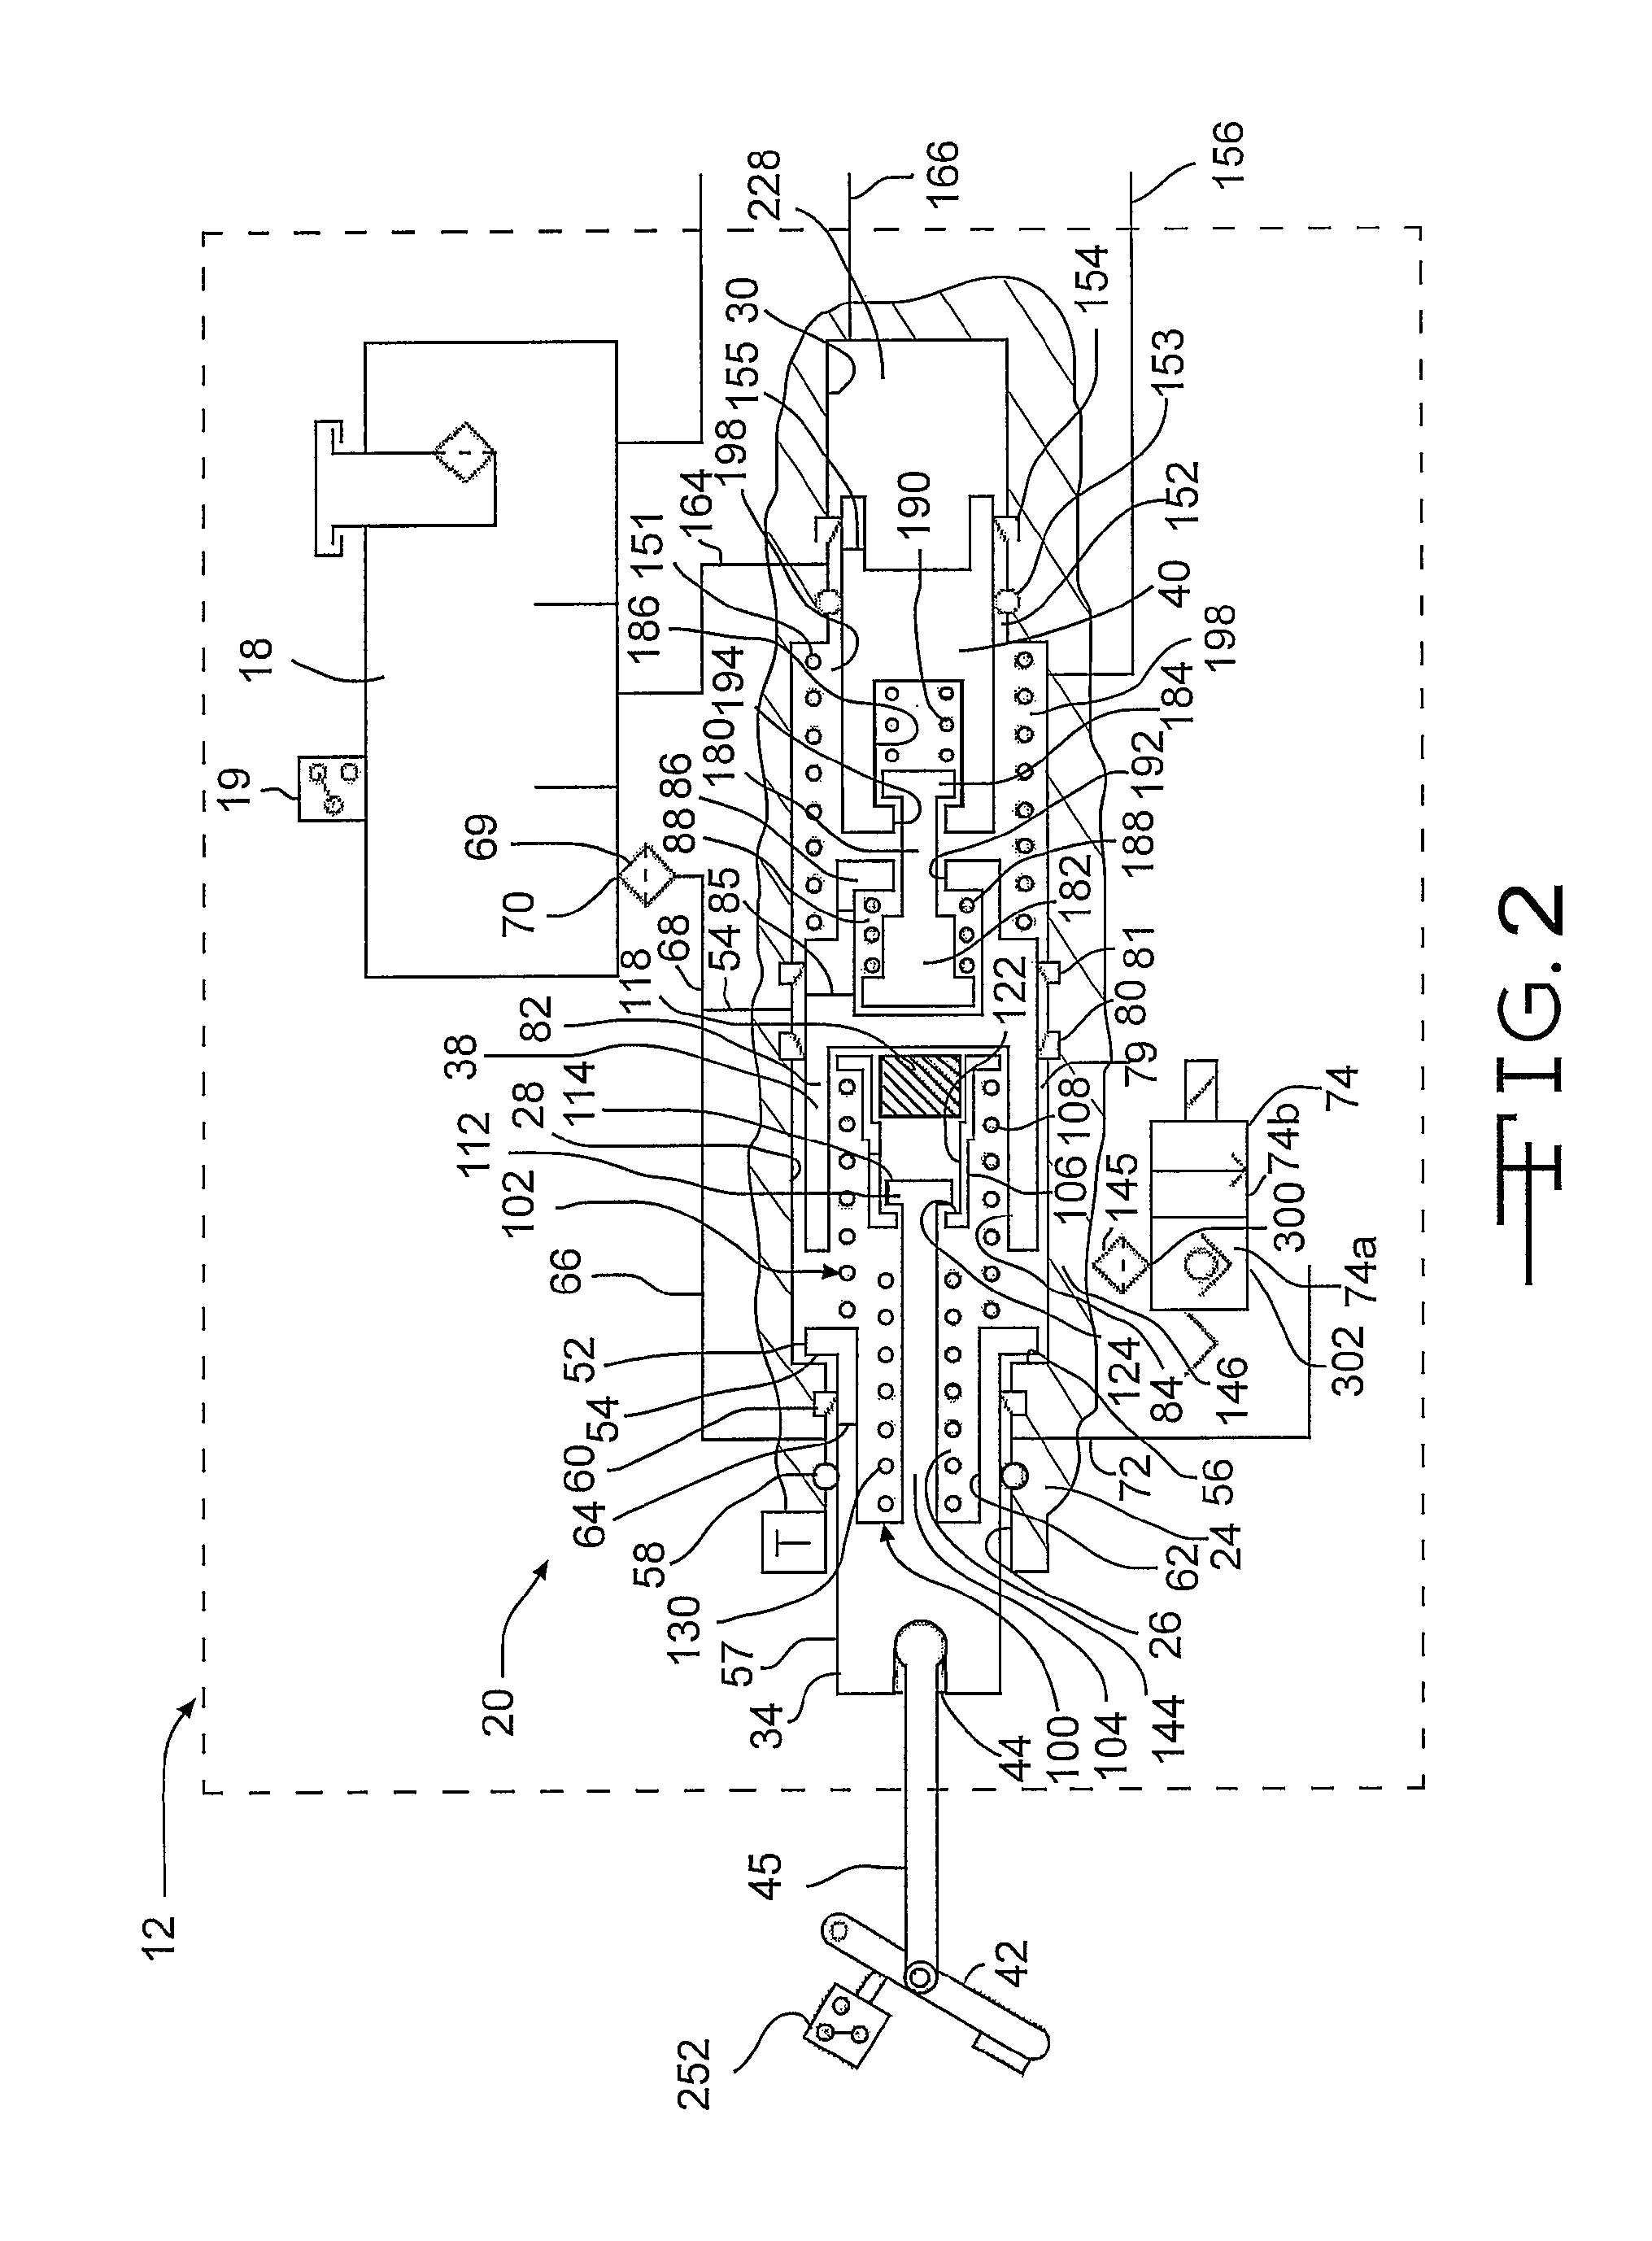 Vehicle brake system with dual acting plunger assembly